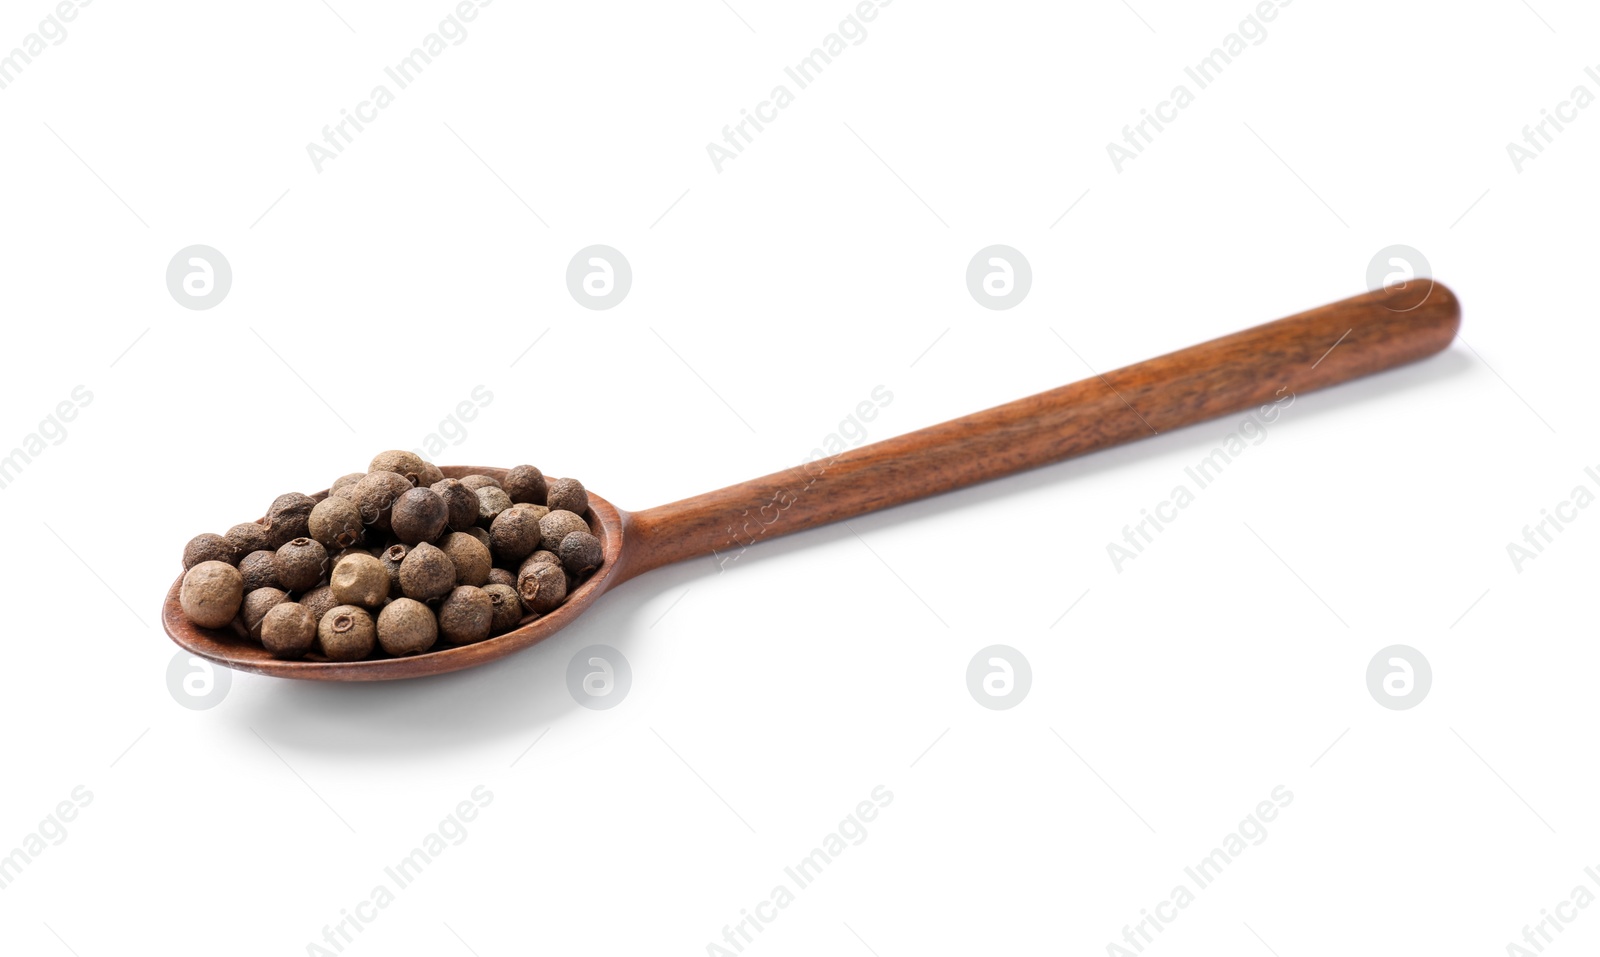 Photo of Dry allspice berries (Jamaica pepper) in spoon isolated on white